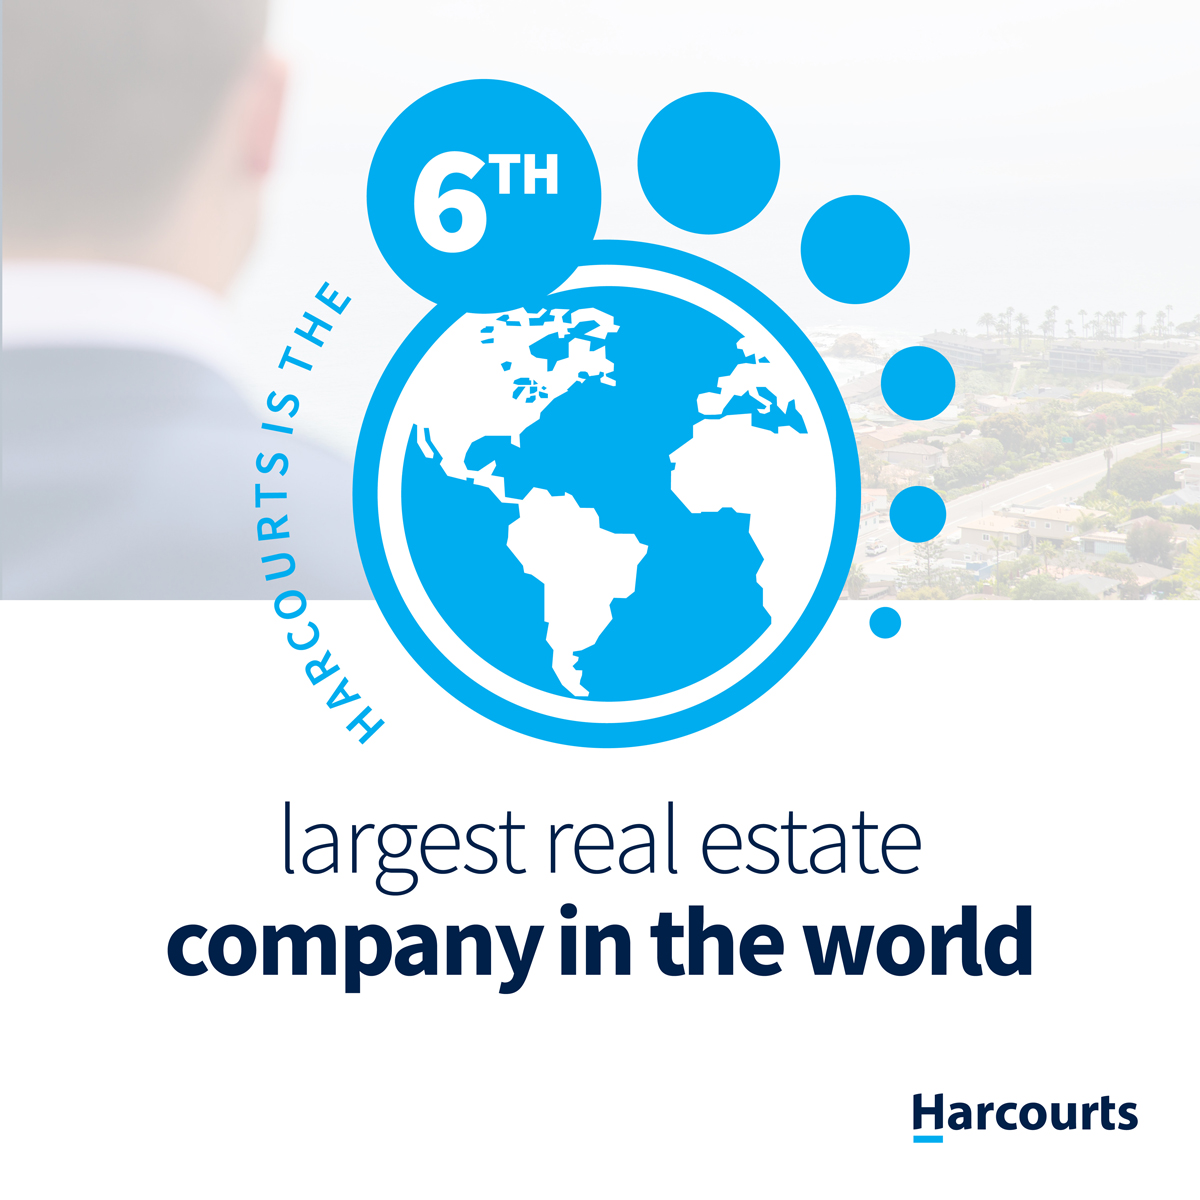 Harcourts is the 6th largest real estate company in the world.